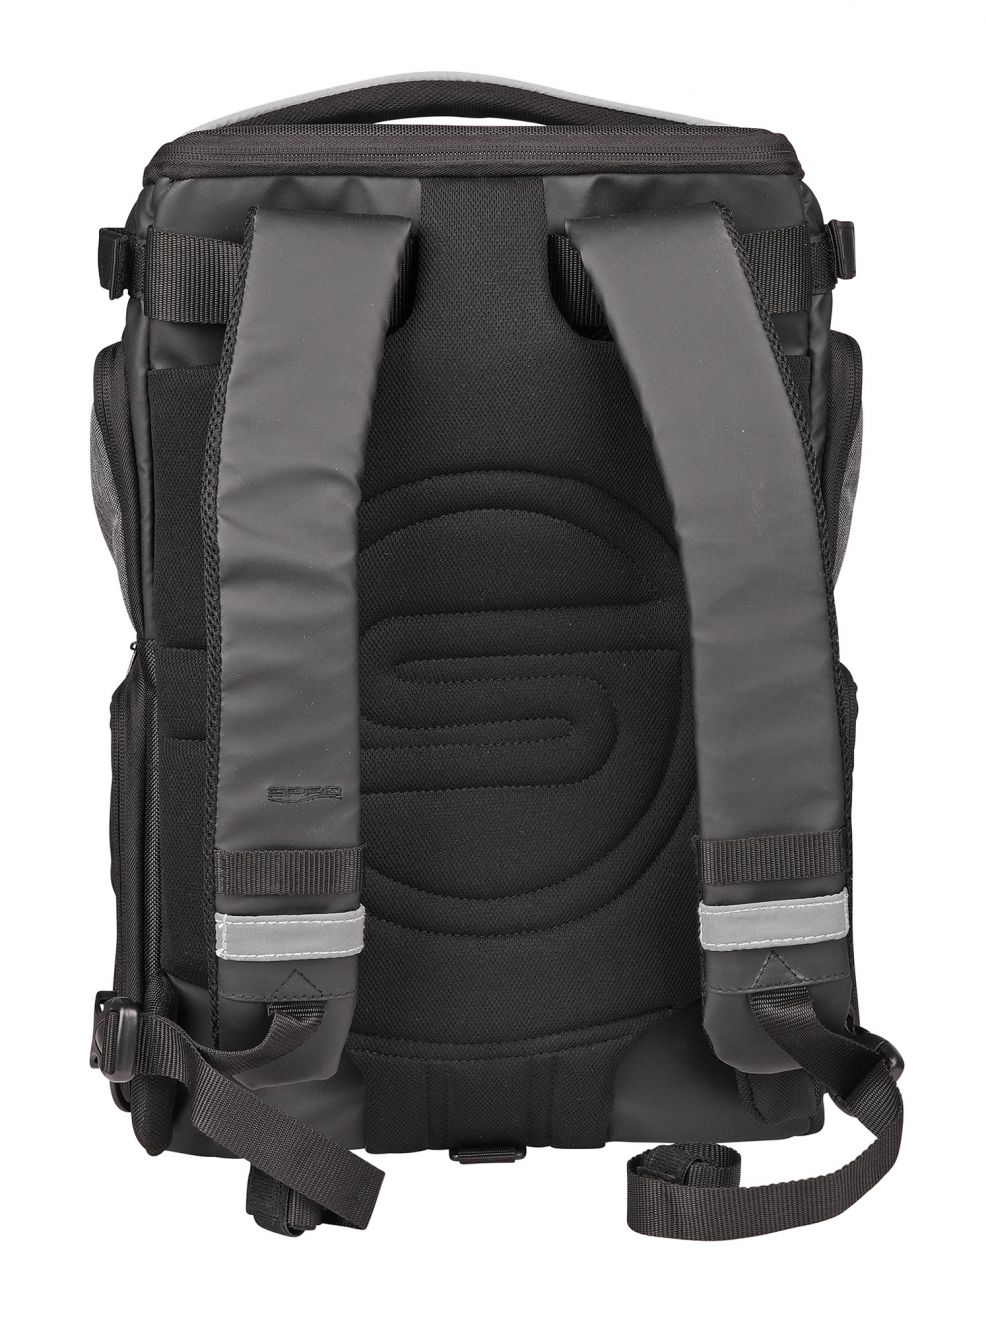 Spro Freestyle Backpack 35 45 x 35 x 17cm (incl. 6 boxen)